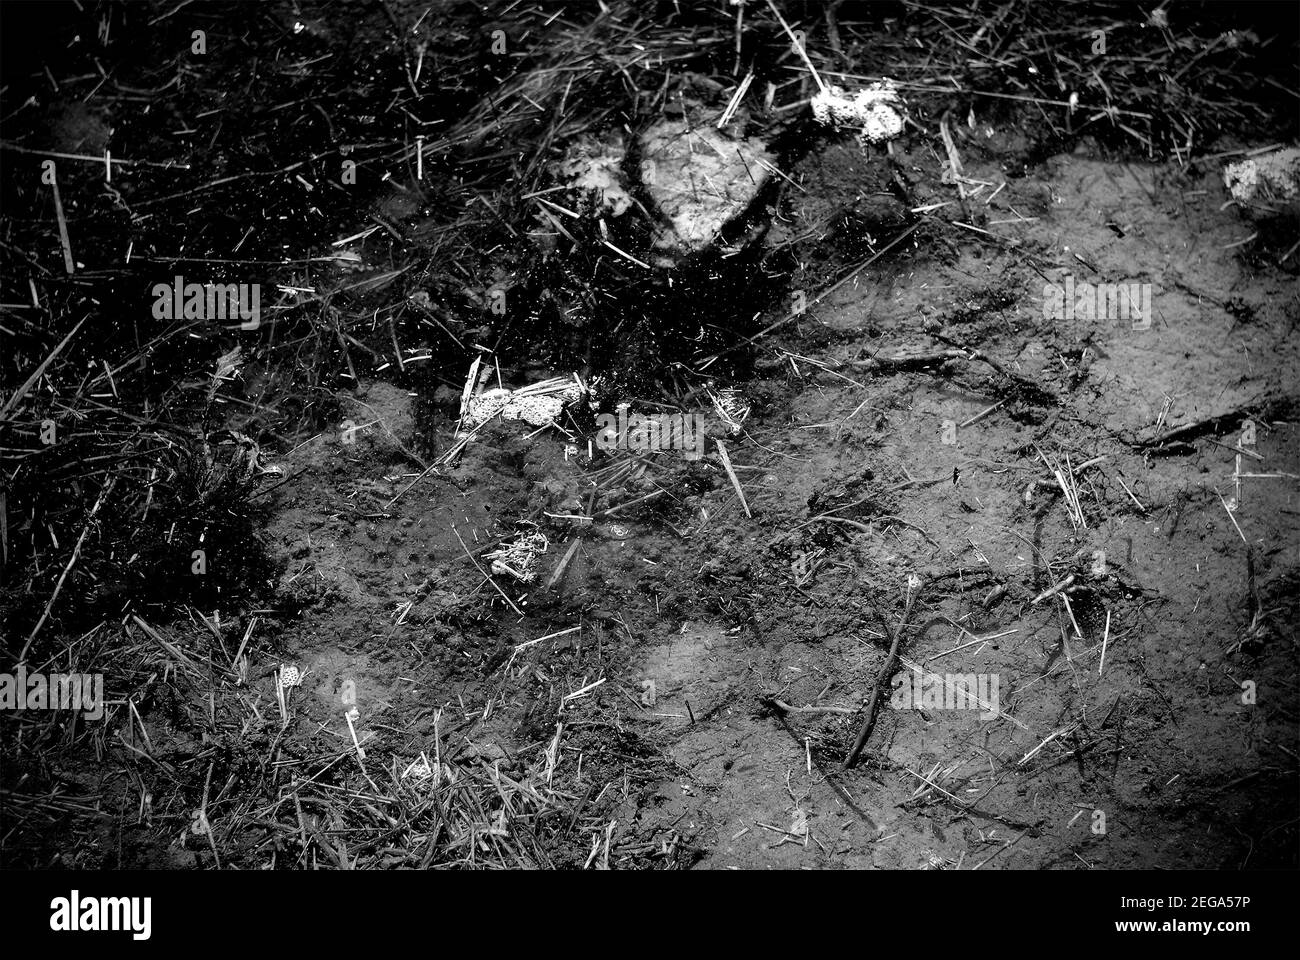 Black and white image of a puddle with dry grass and pieces of wood. Stock Photo